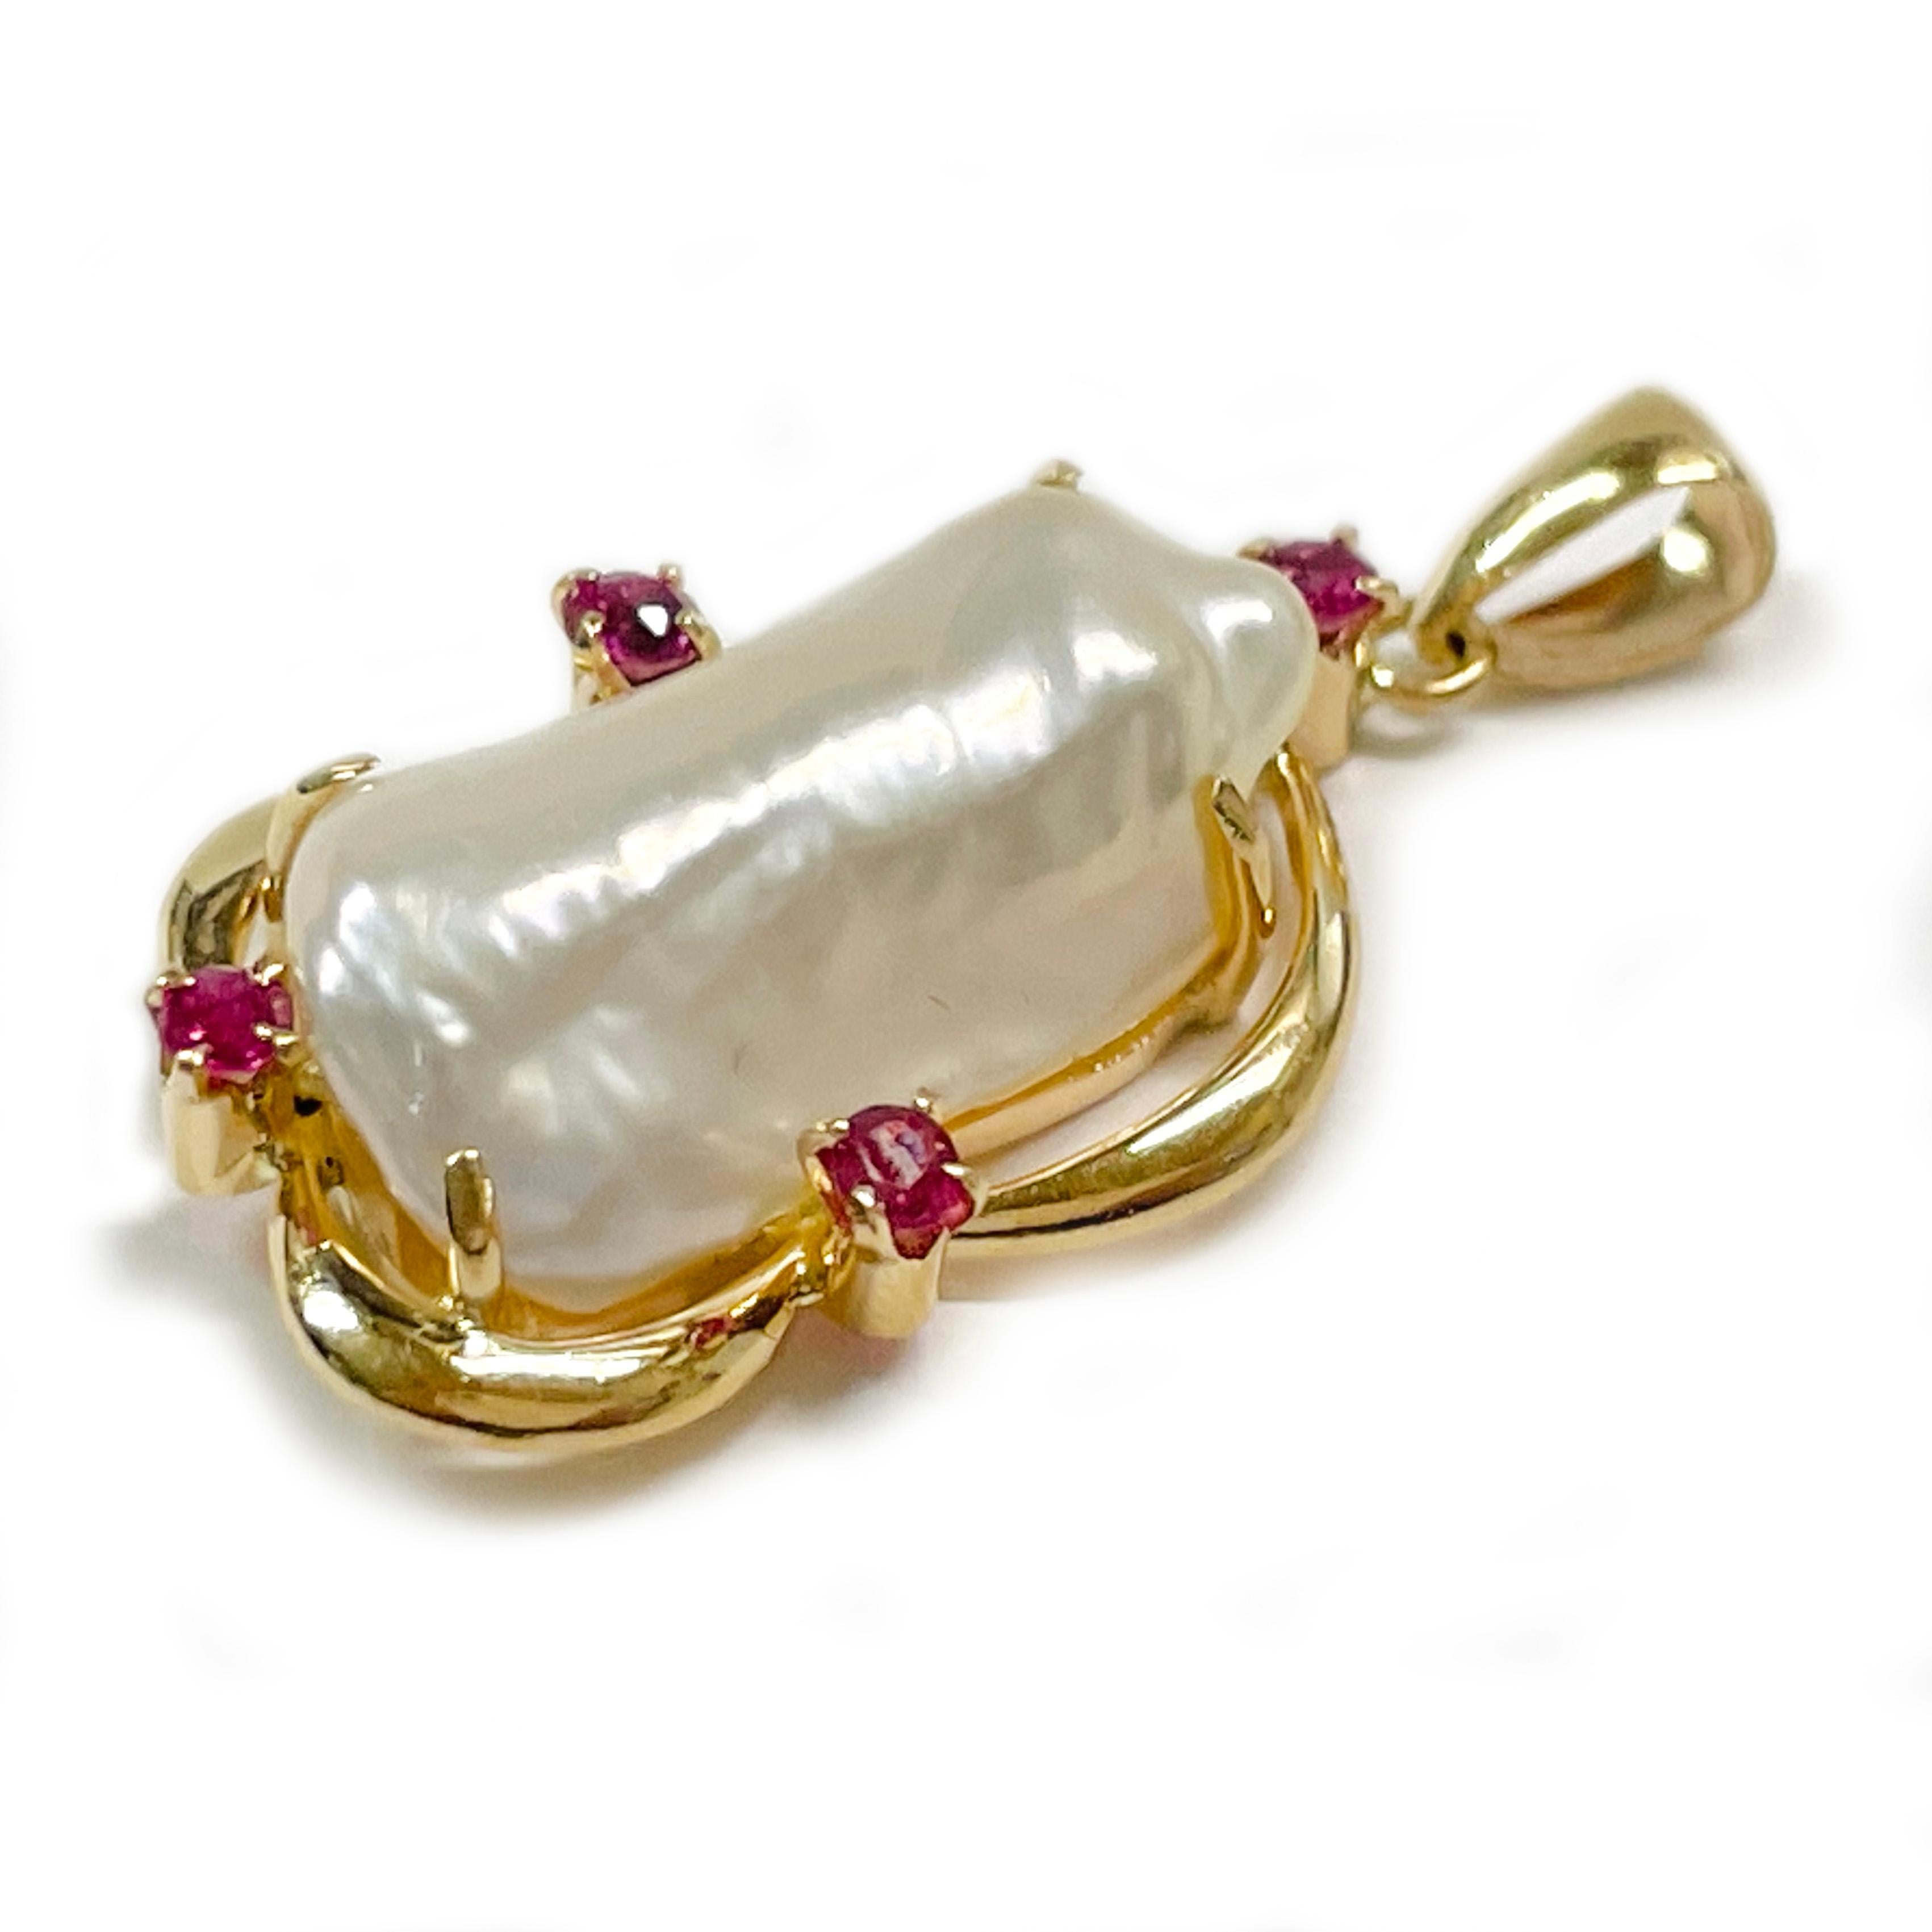 14 Karat Yellow Gold Baroque Pearl Ruby Pendant. The pendant features a white freshwater Baroque prong-set on an open bezel with four prong-set round rubies. The pearl has good luster and slight hues of pink and blue/green. The rubies measure 1.8mm